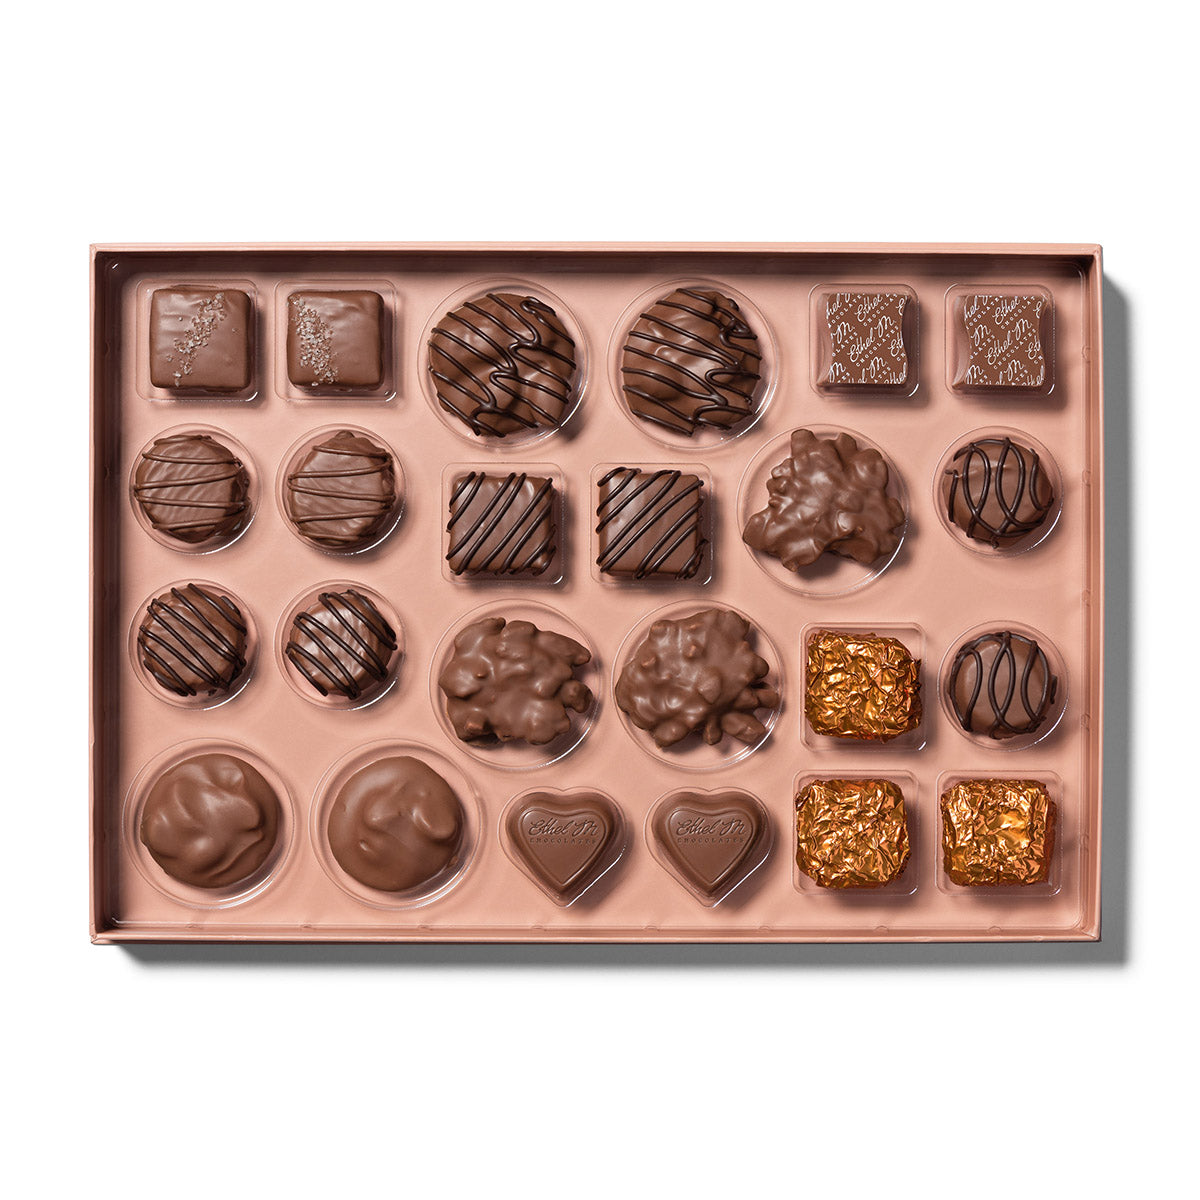 Delight on this 24 Piece Ethel M Chocolates Ultimate Assortment of the Finest Milk Chocolate coverings and Gourmet Fillings.